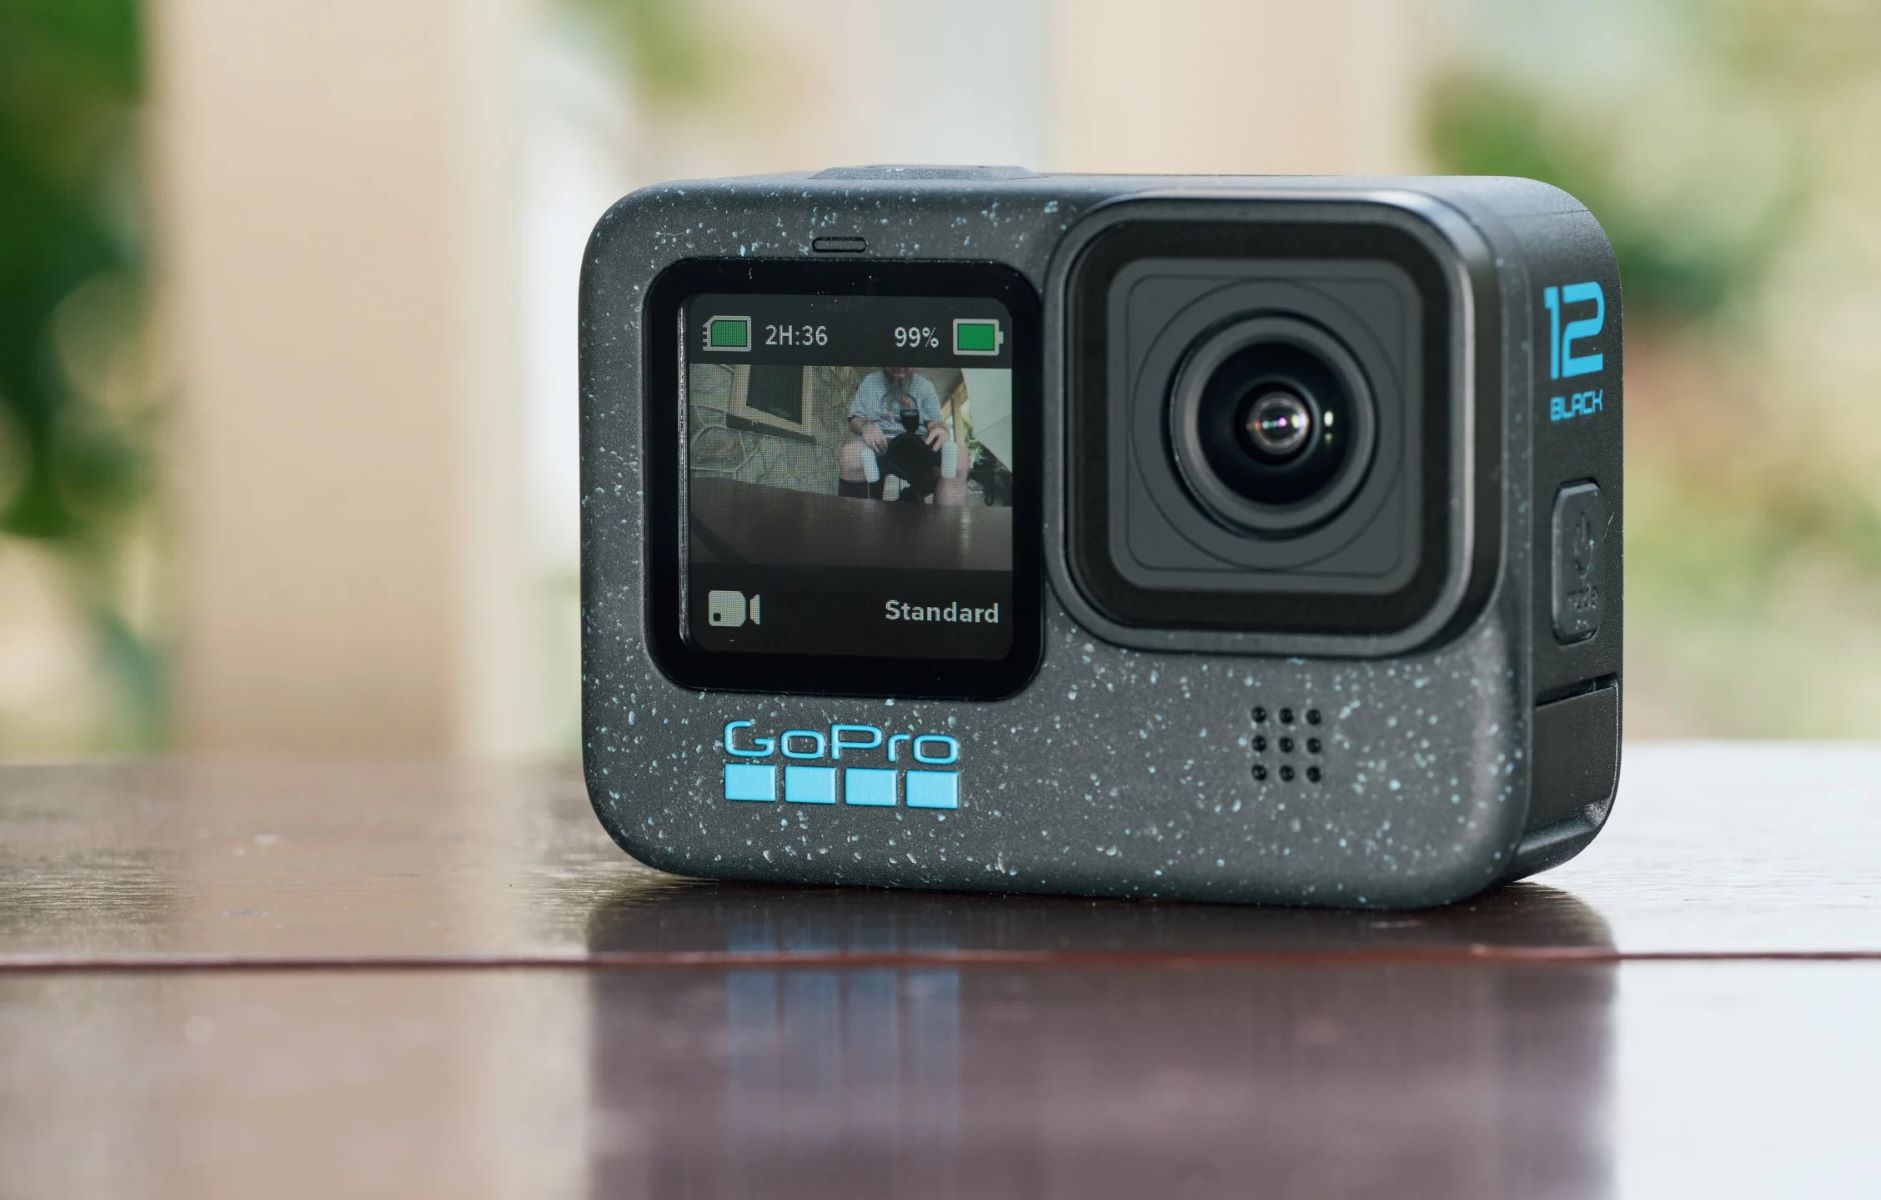 How To Transfer Video From Action Camera To Mac